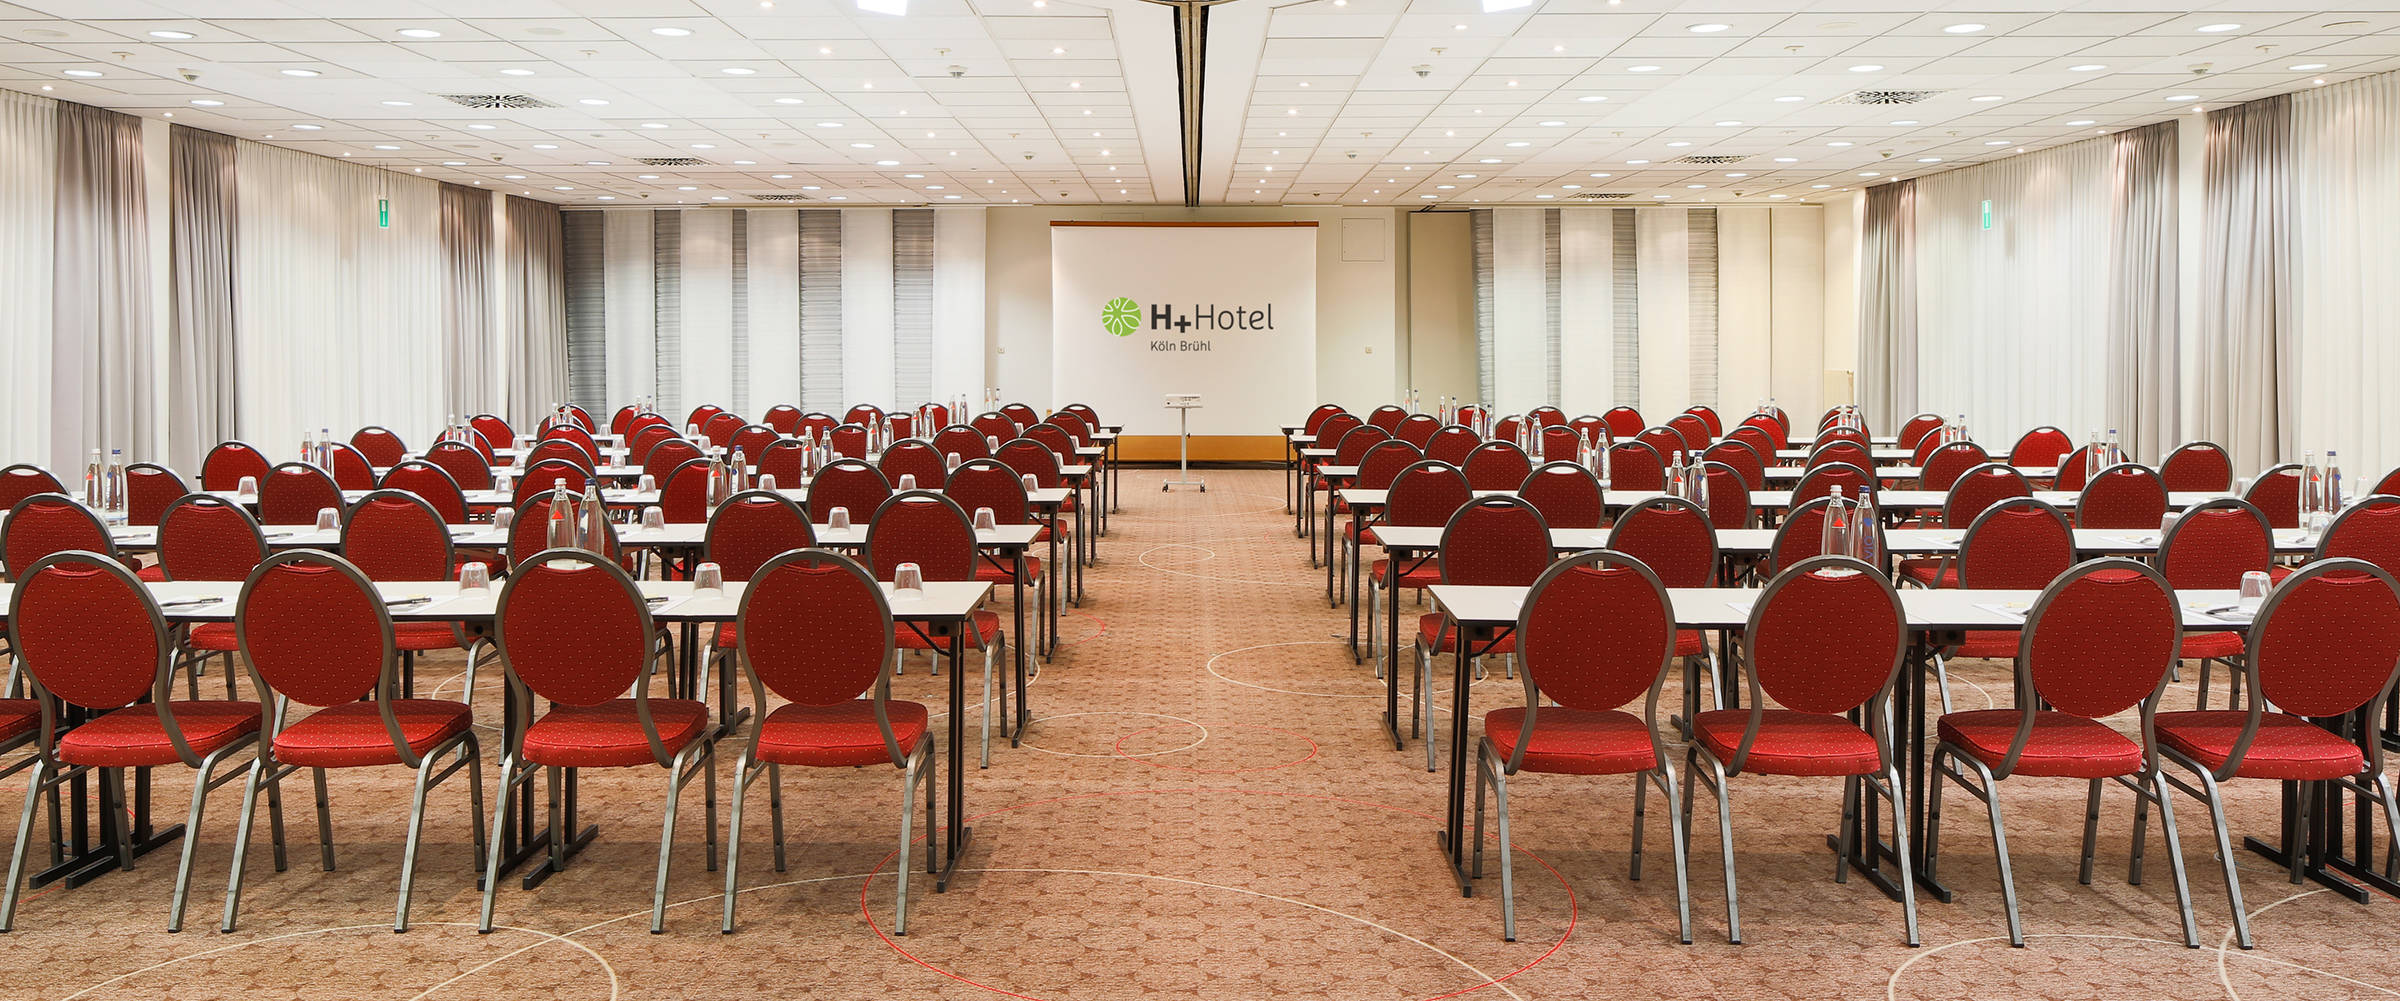 Conference hotels - meetings at the H-Hotels.com